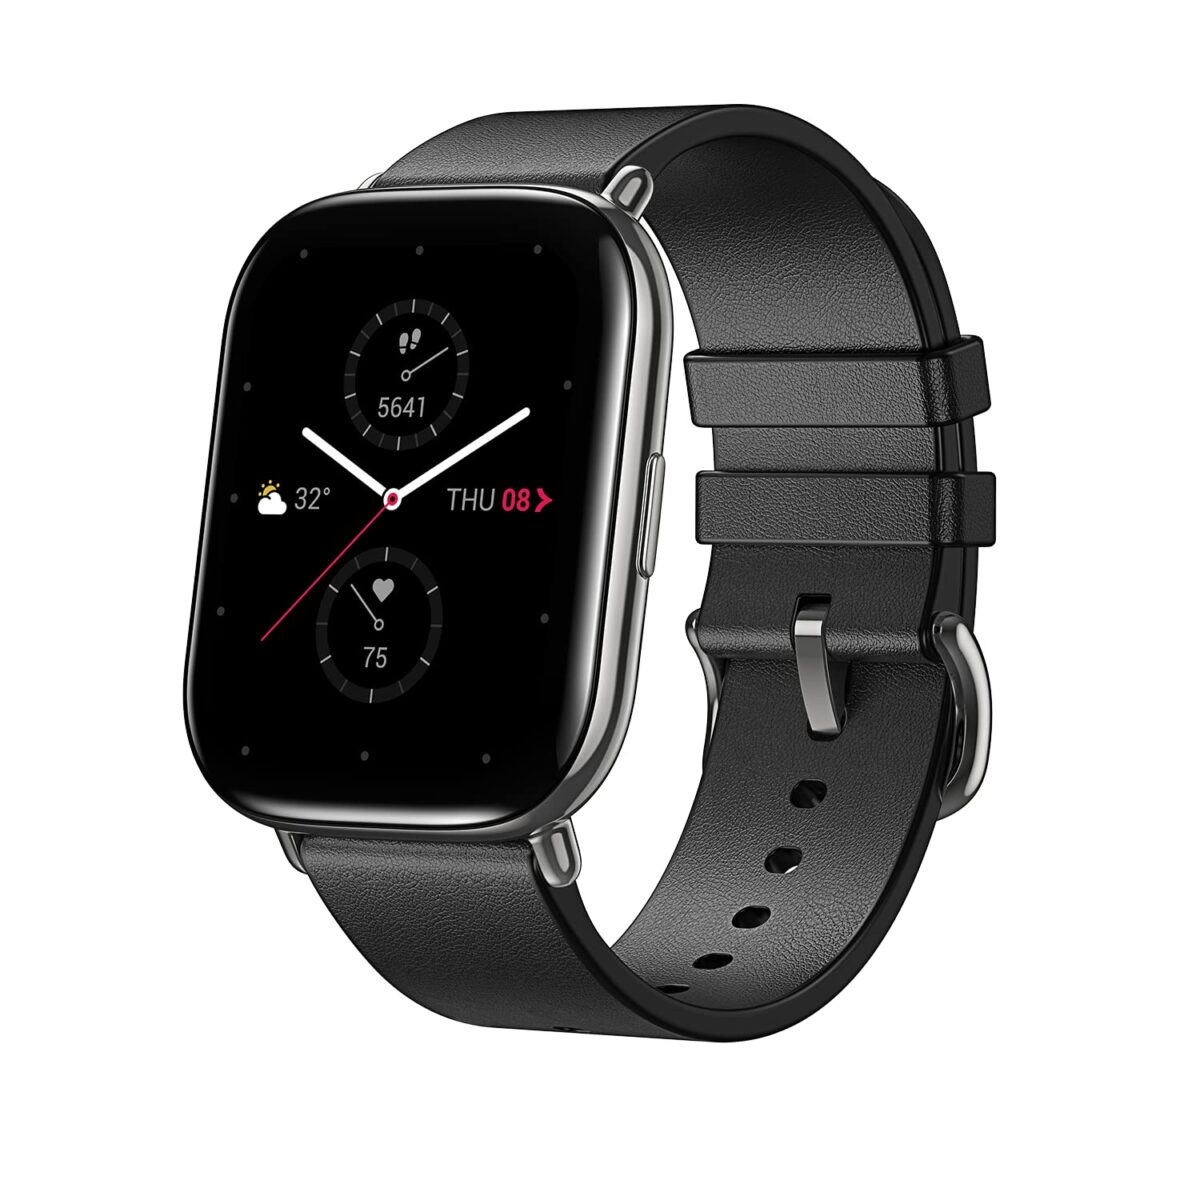 Amazfit Zepp E Smartwatch Launched in India | Check Price, Specs and Features